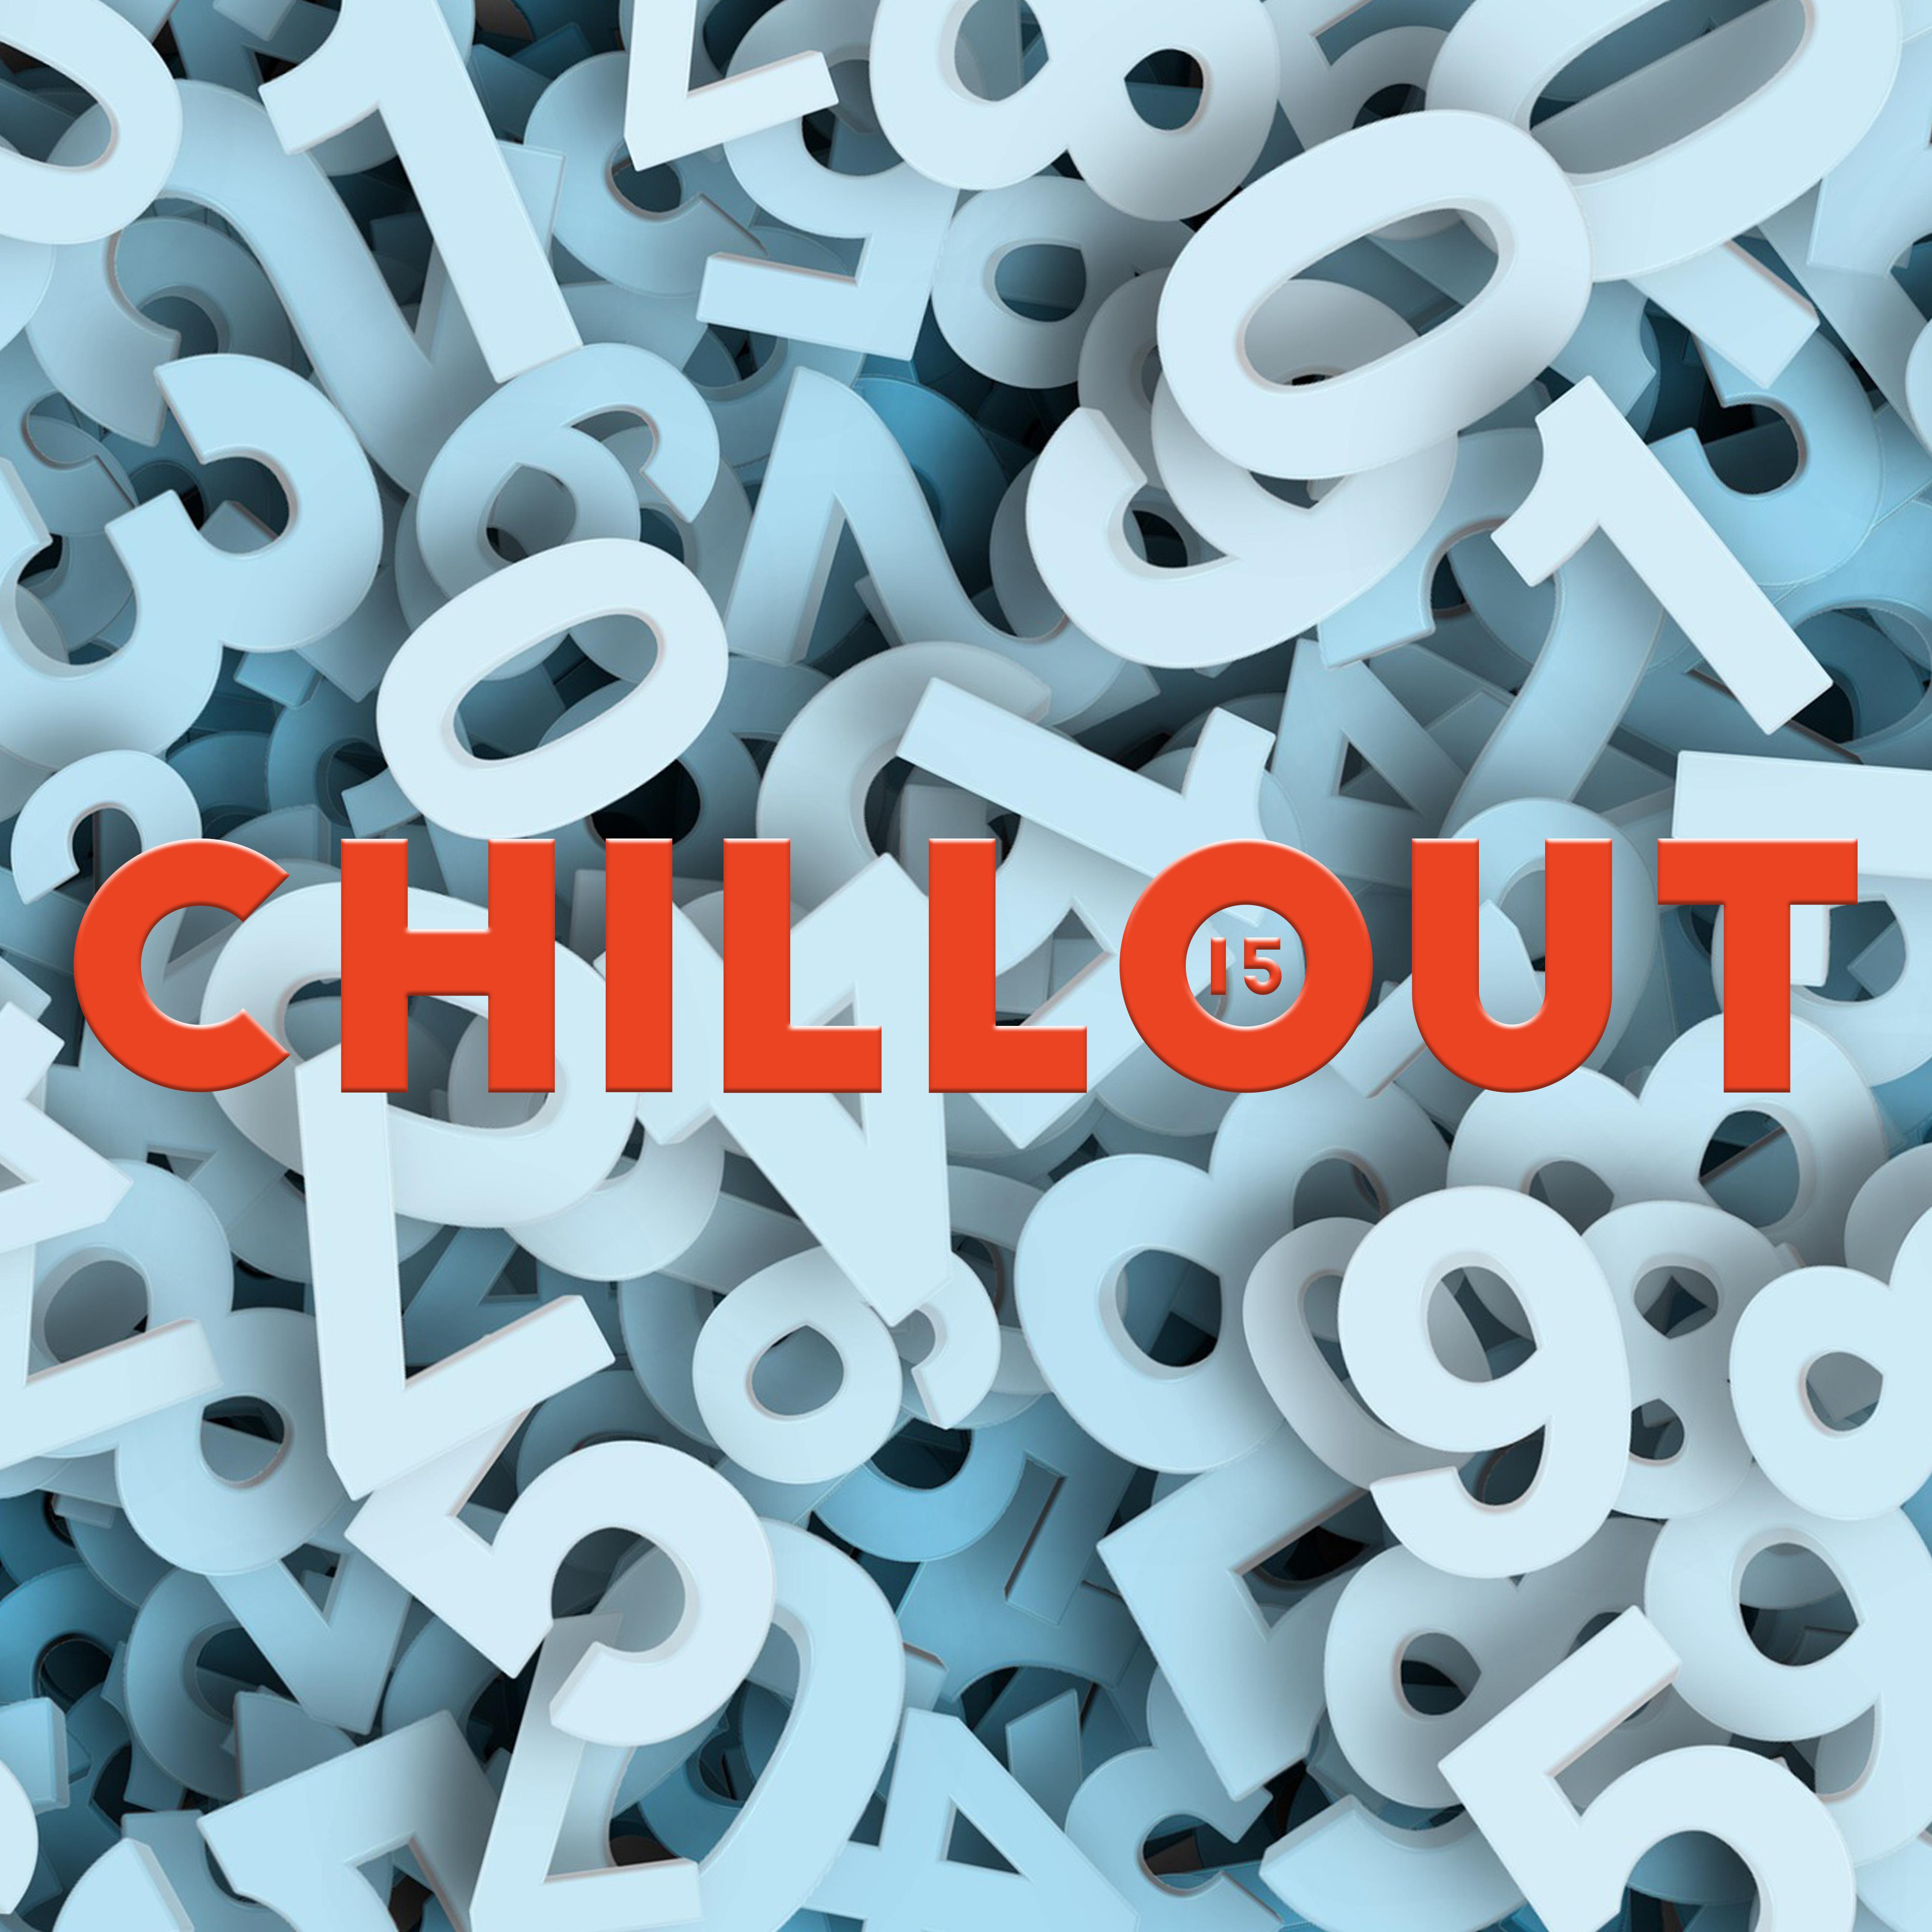 Chillout 15